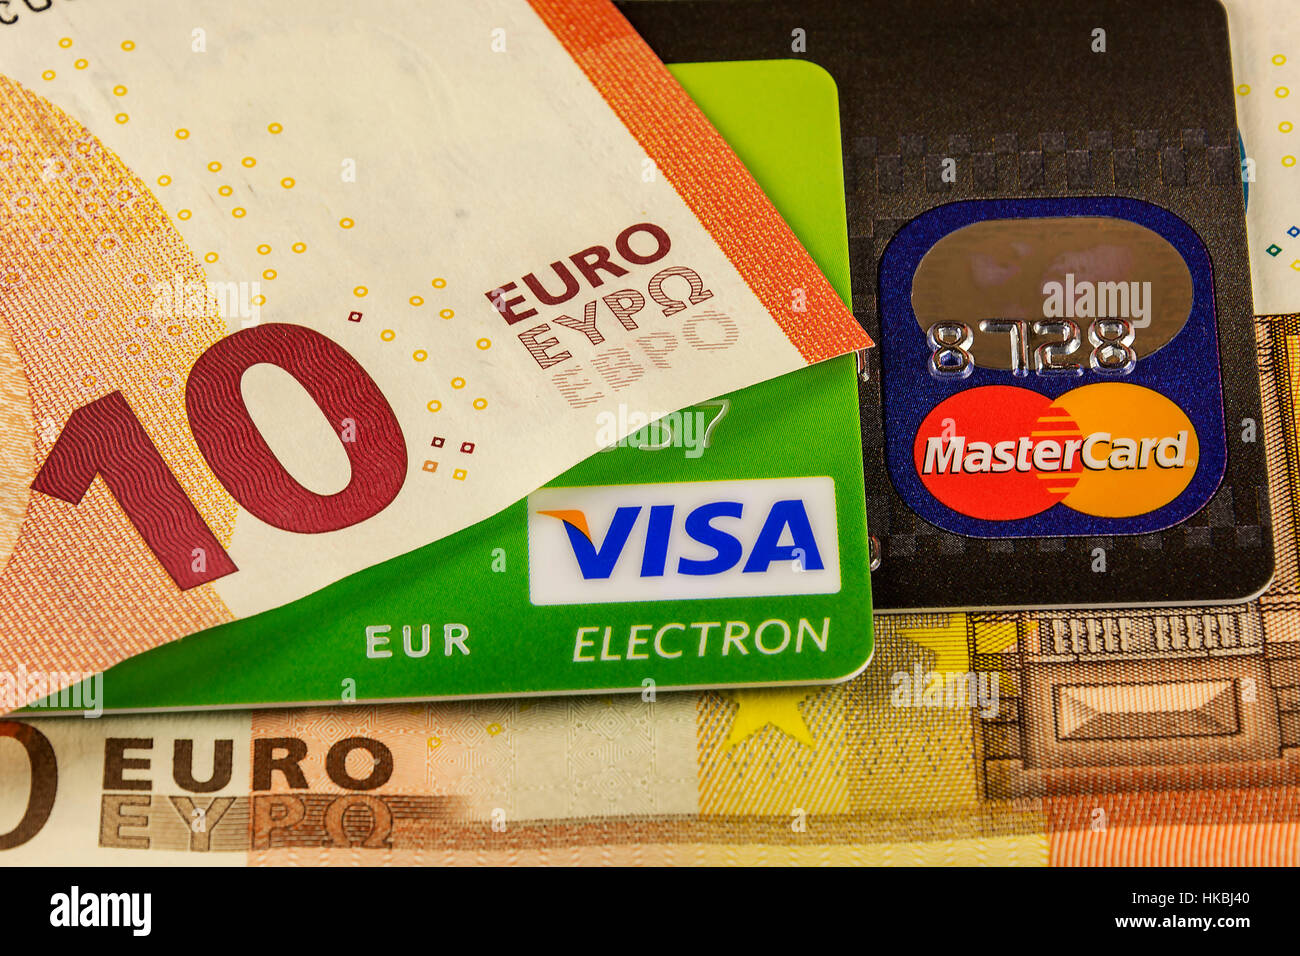 Part of the bank card cashless payment systems Visa and Master Card and parts of the euro banknotes Stock Photo